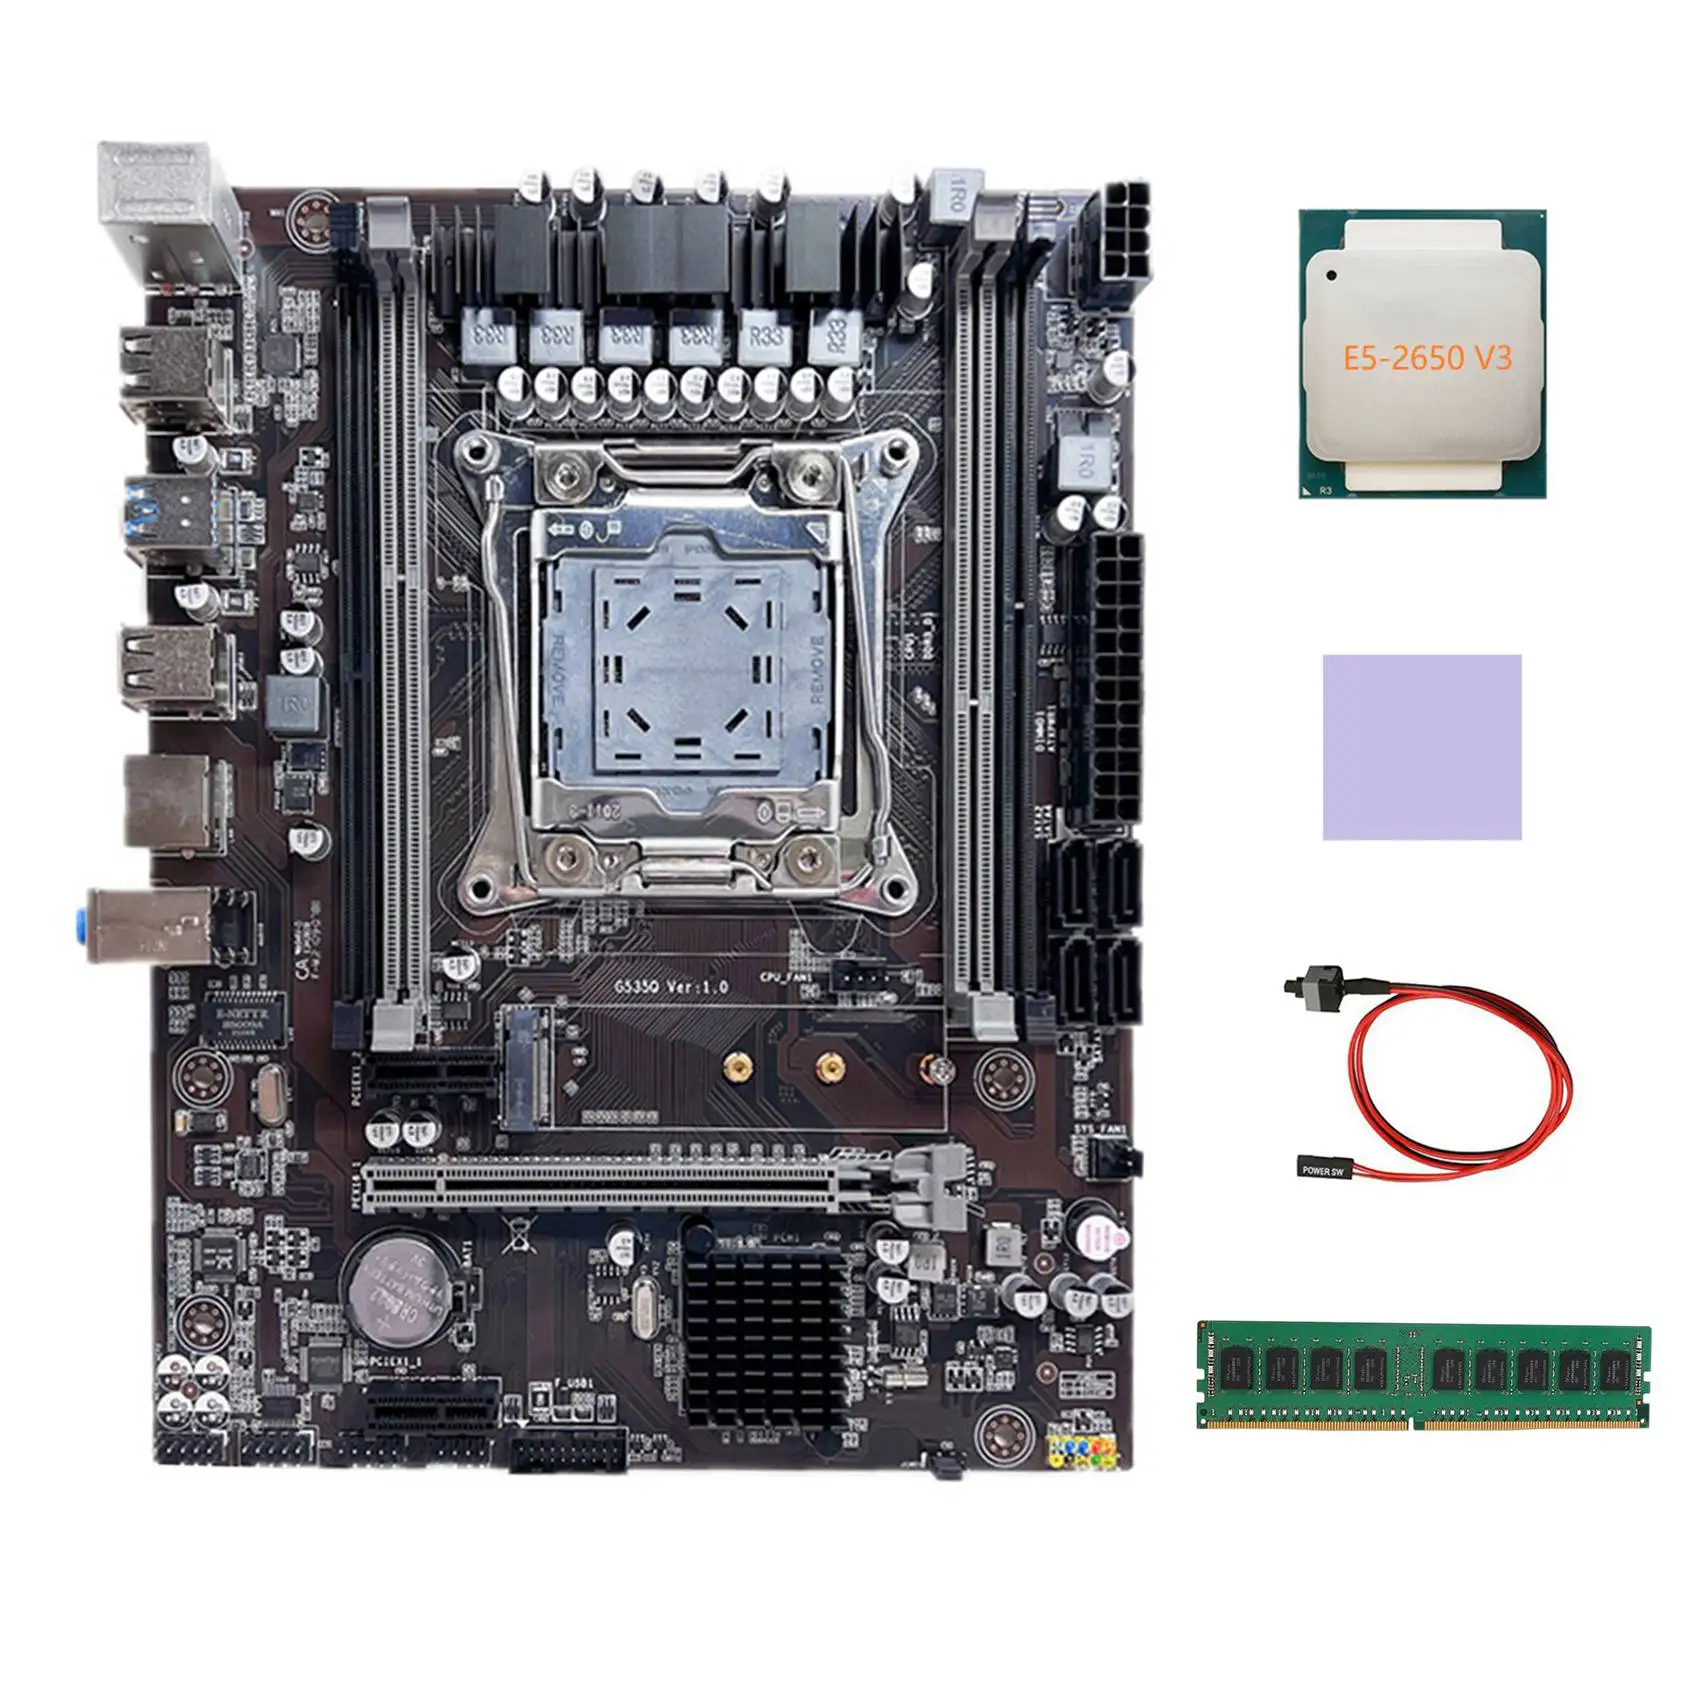 

X99 Motherboard LGA2011-3 Computer Motherboard with E5 2650 V3 CPU+DDR4 4GB 2133 Mhz RAM+Switch Cable+Thermal Pad